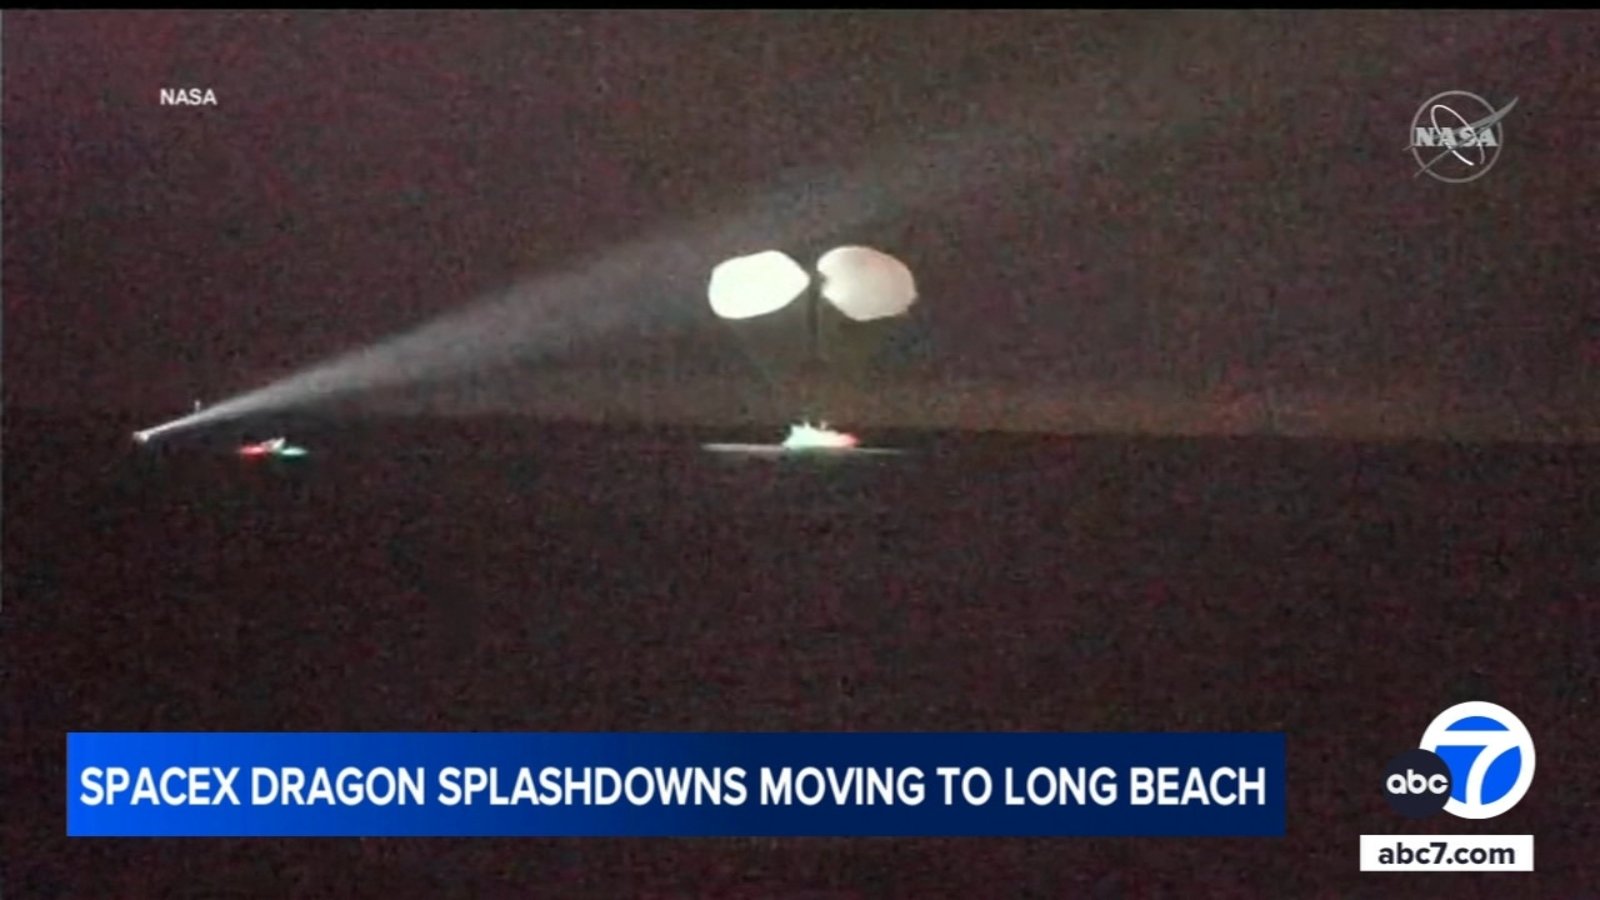 SpaceX moving spacecraft splashdowns to Long Beach, days after Elon Musk said company was leaving CA